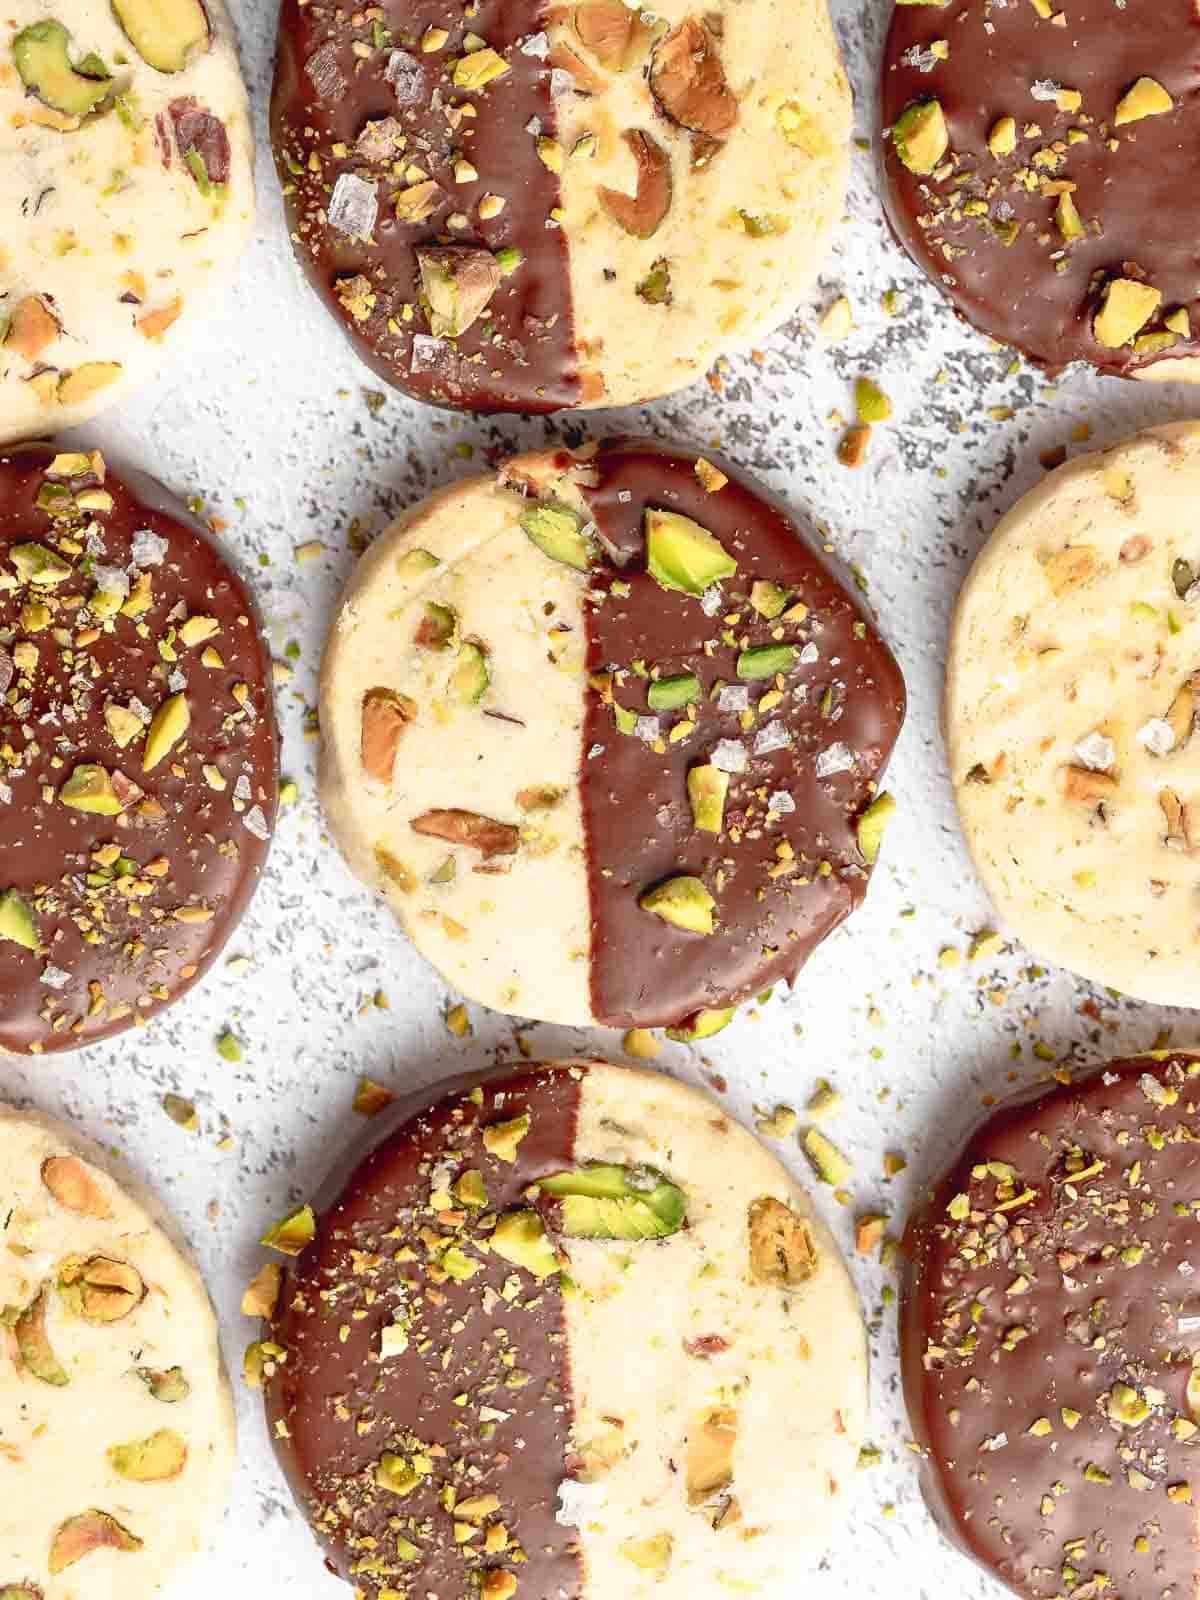 Chocolate dipped pistachio cookies on a tray.